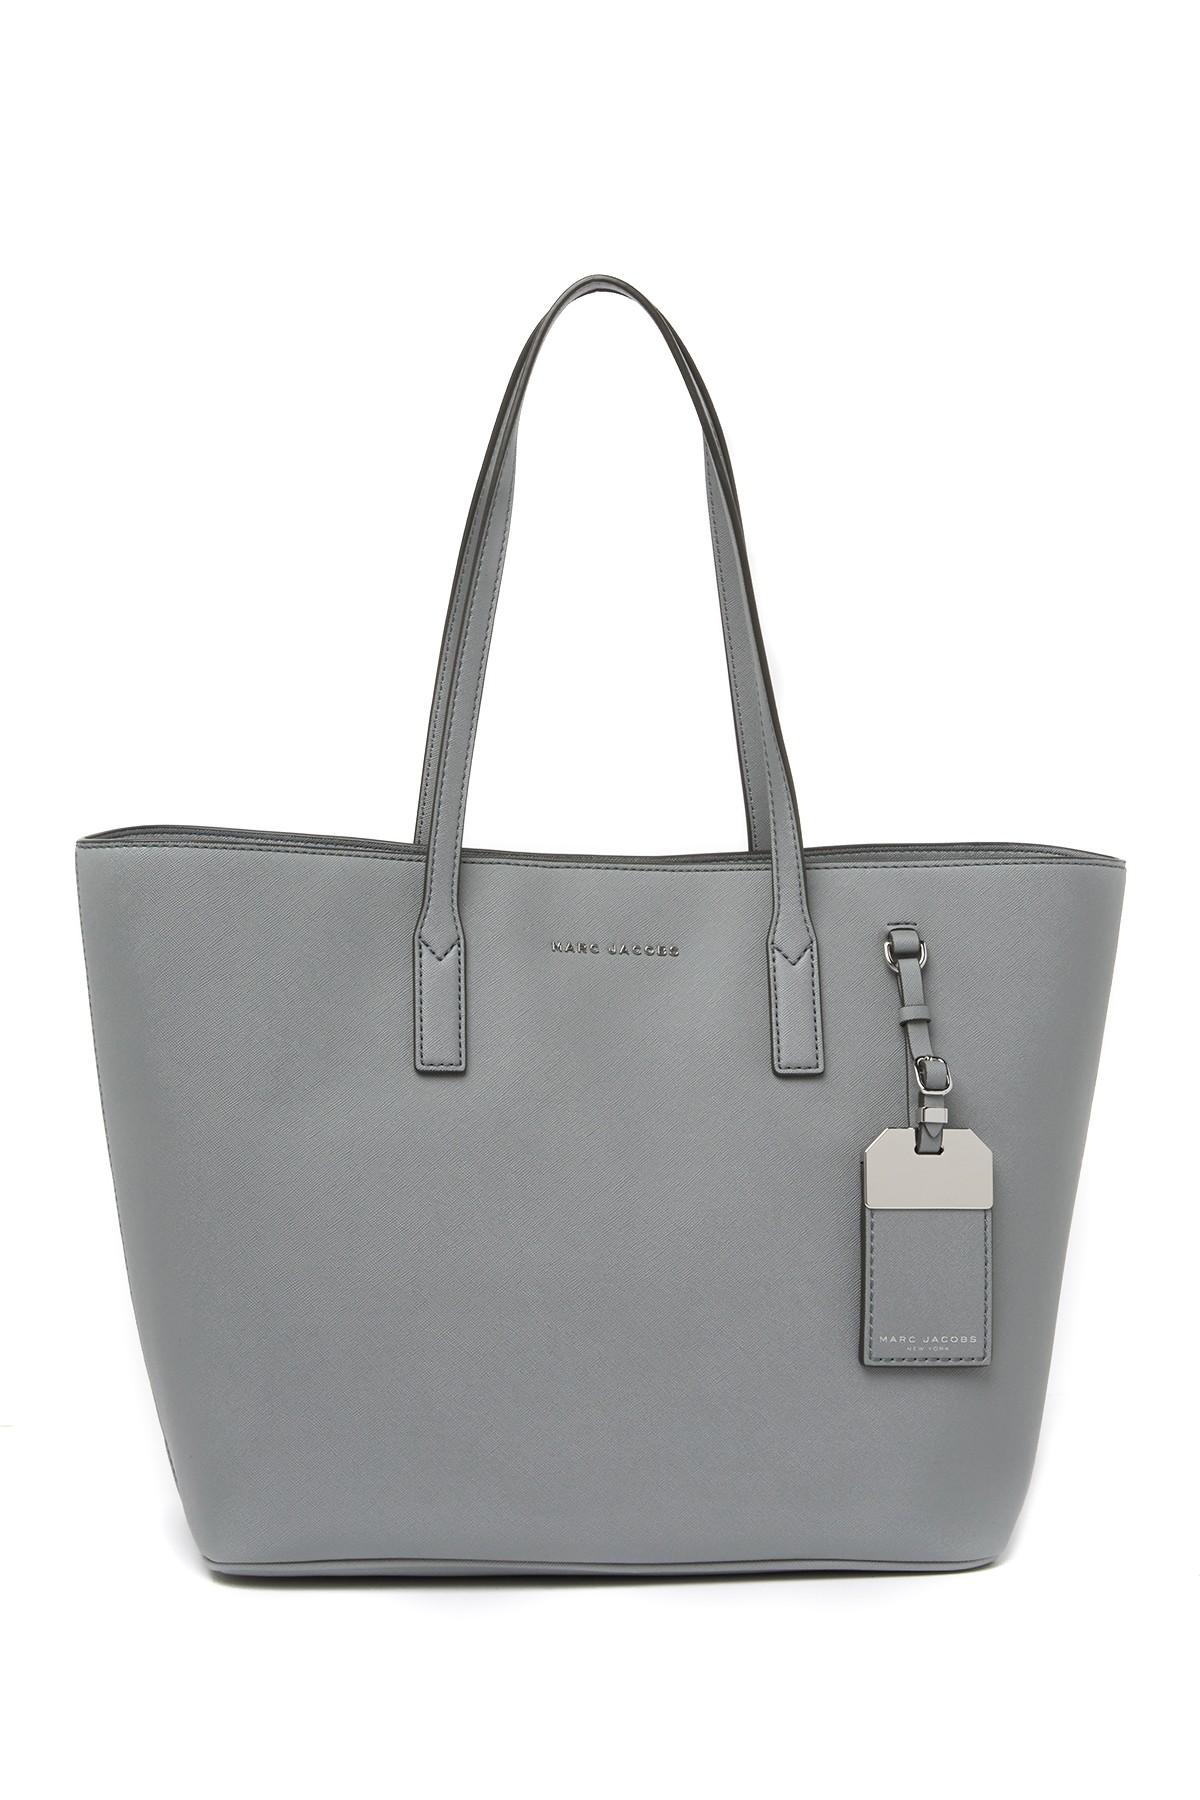 Marc Jacobs Luggage Tag Tote Bag - Lyst